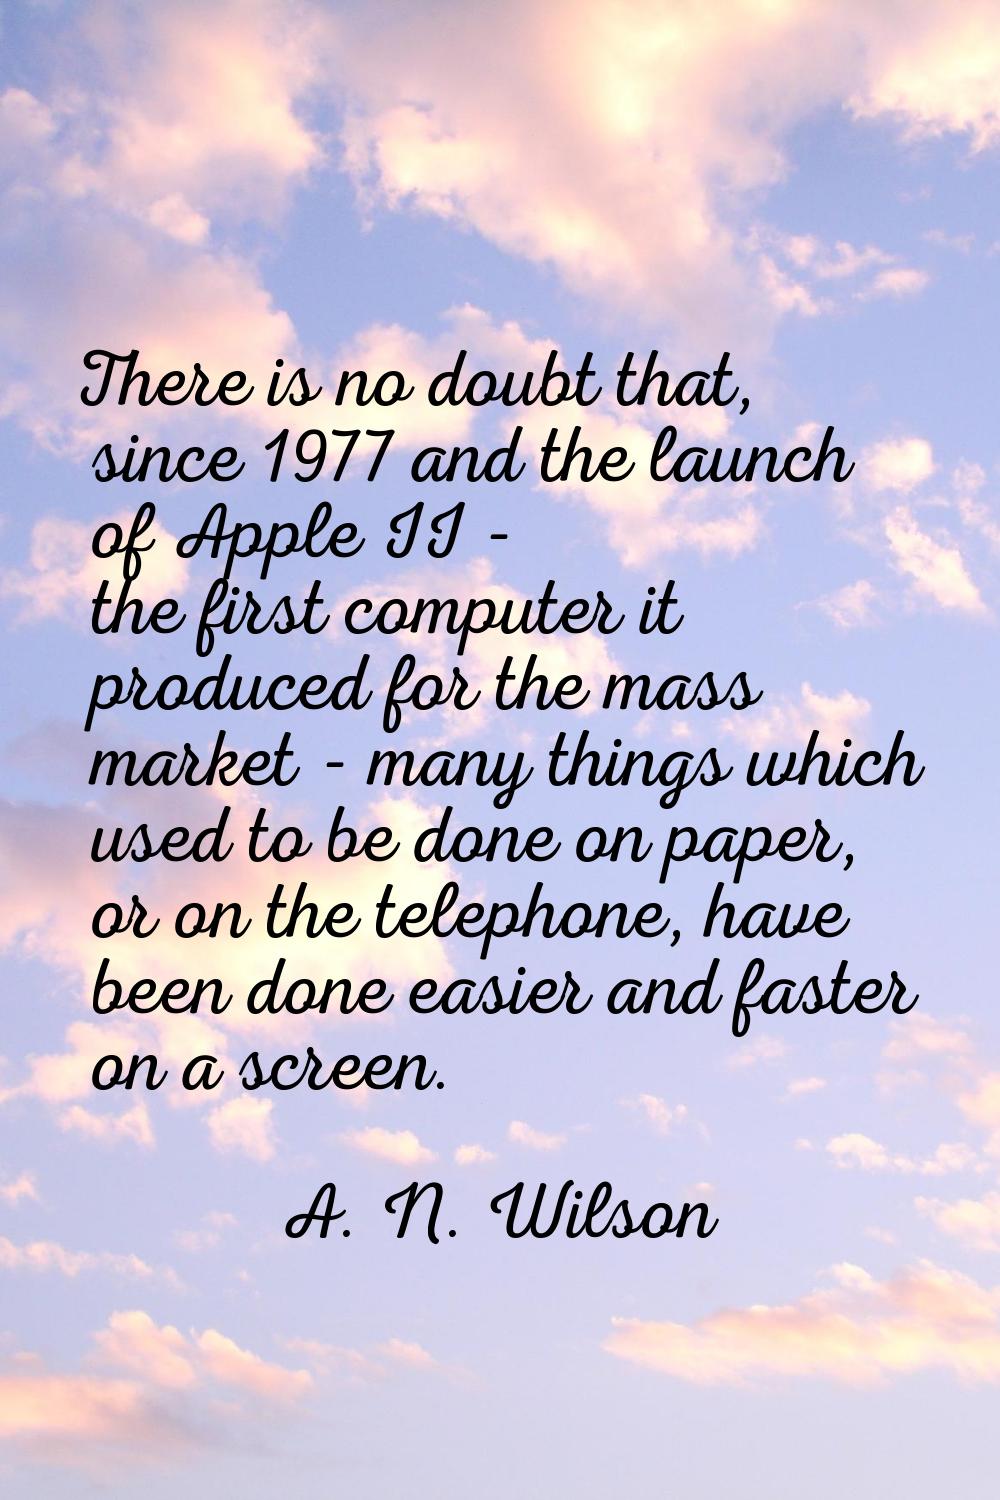 There is no doubt that, since 1977 and the launch of Apple II - the first computer it produced for 